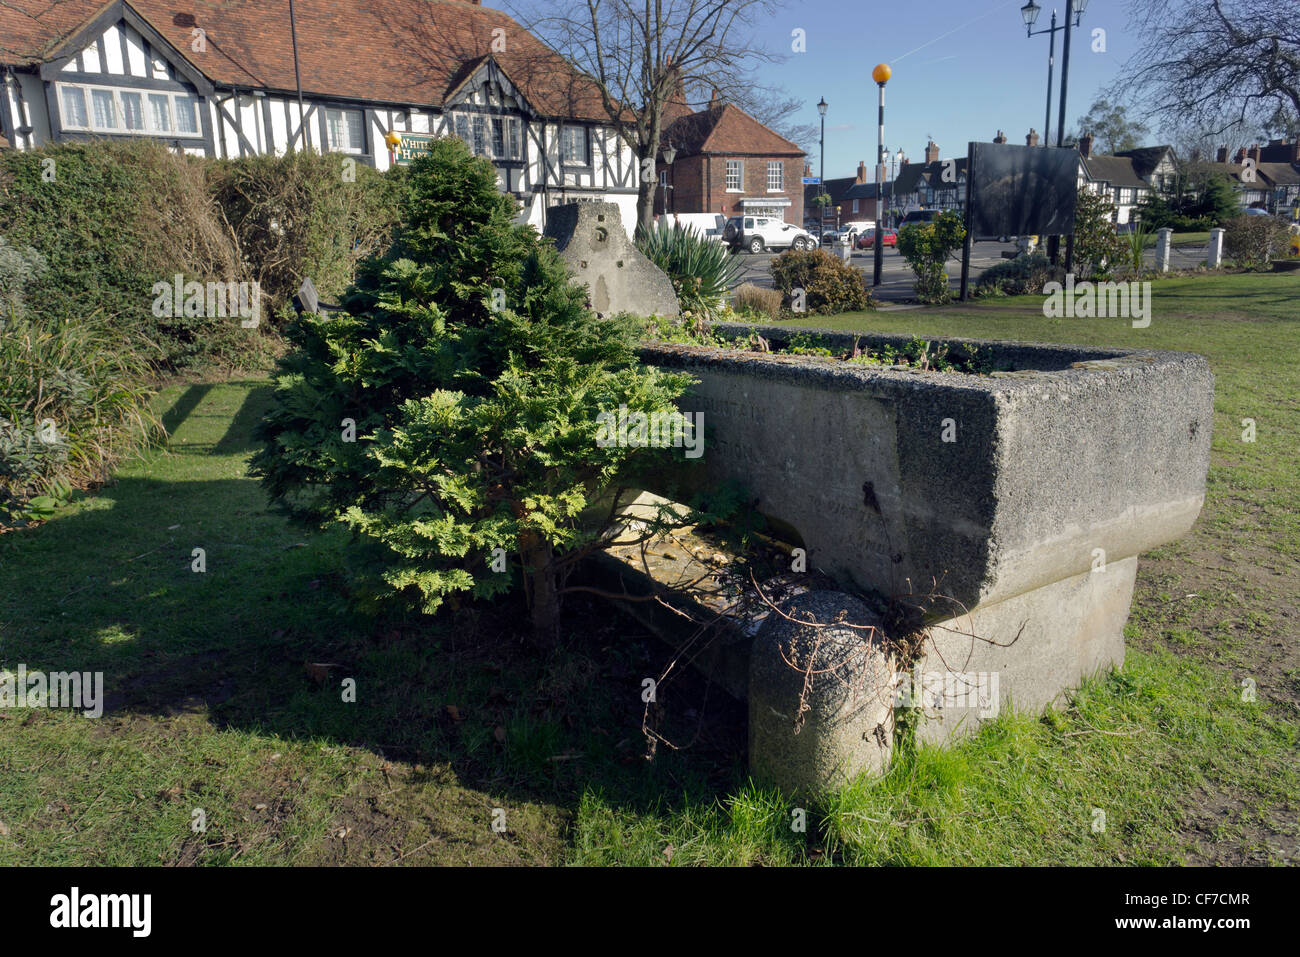 Plants growing out of an old disused concrete horse trough in public gardens old town Beaconsfield Bucks UK Stock Photo